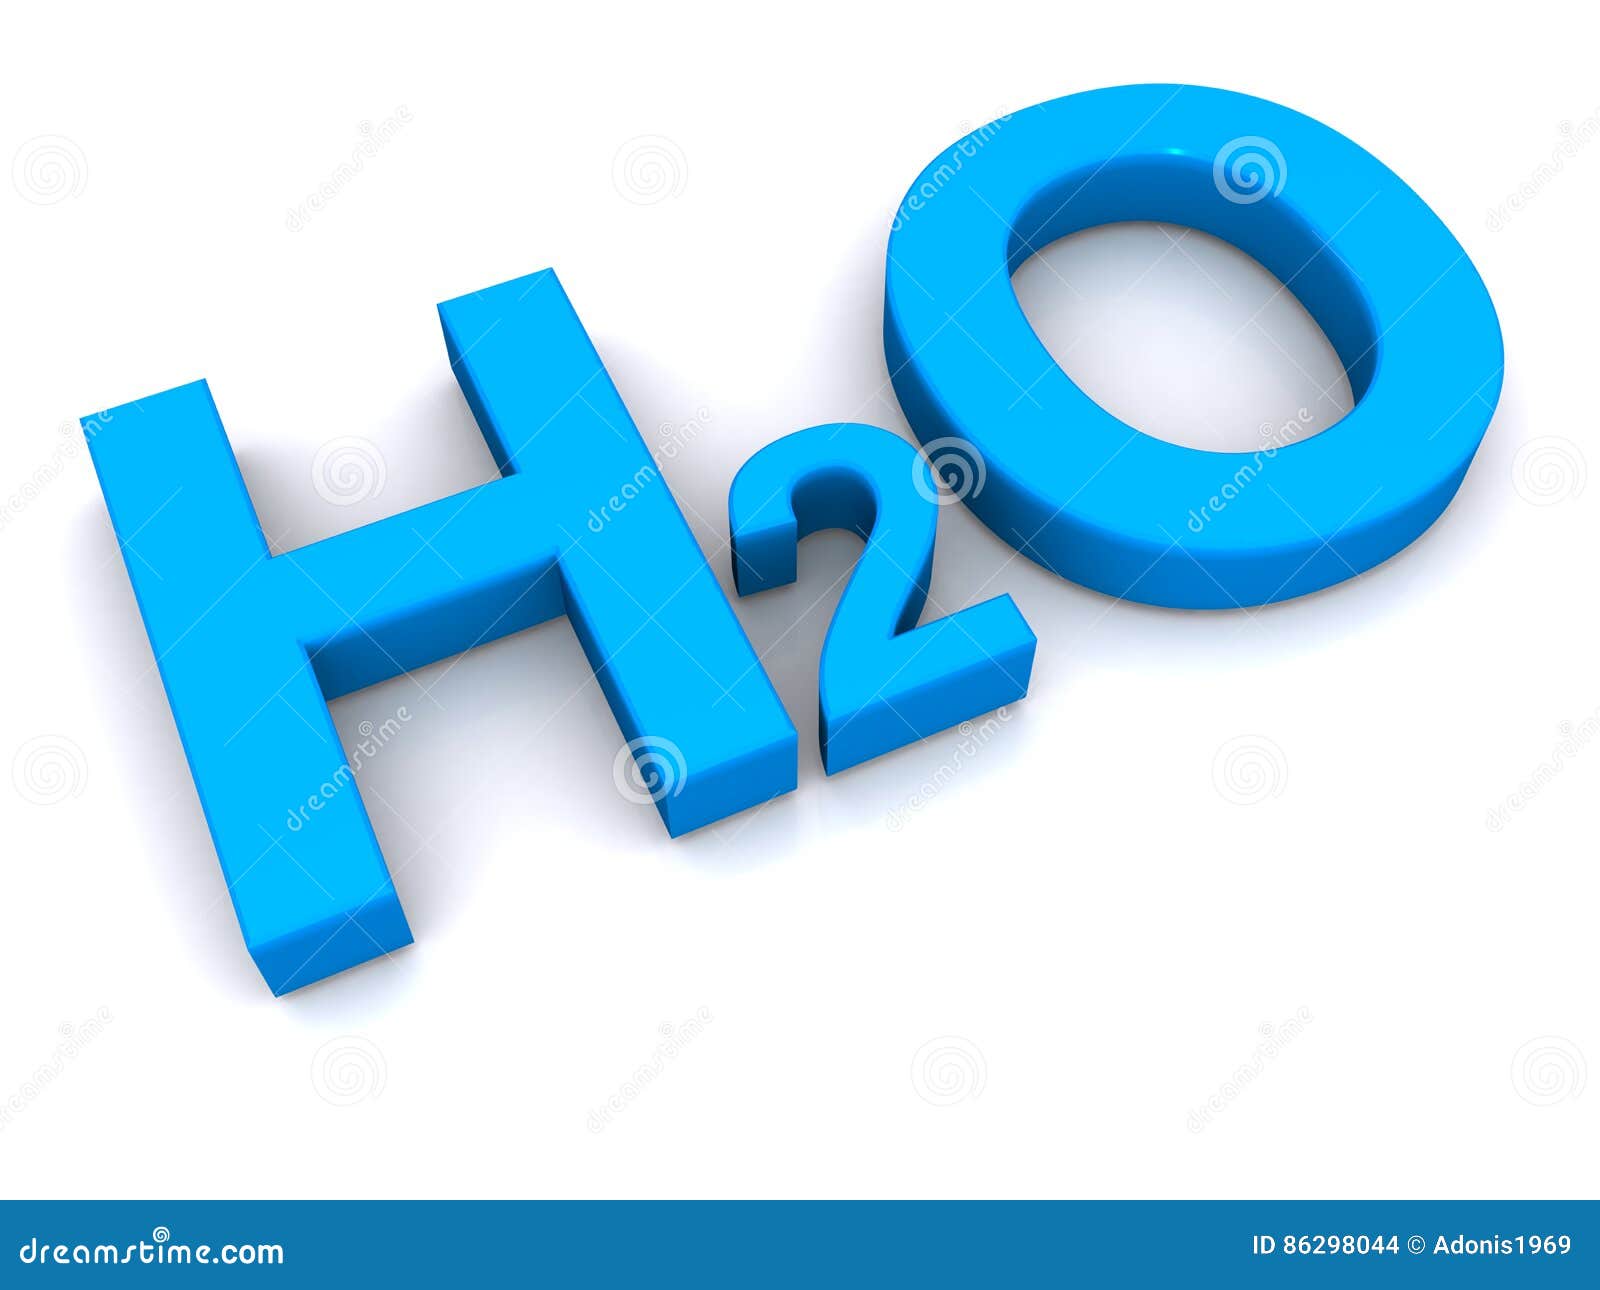 H20 meaning